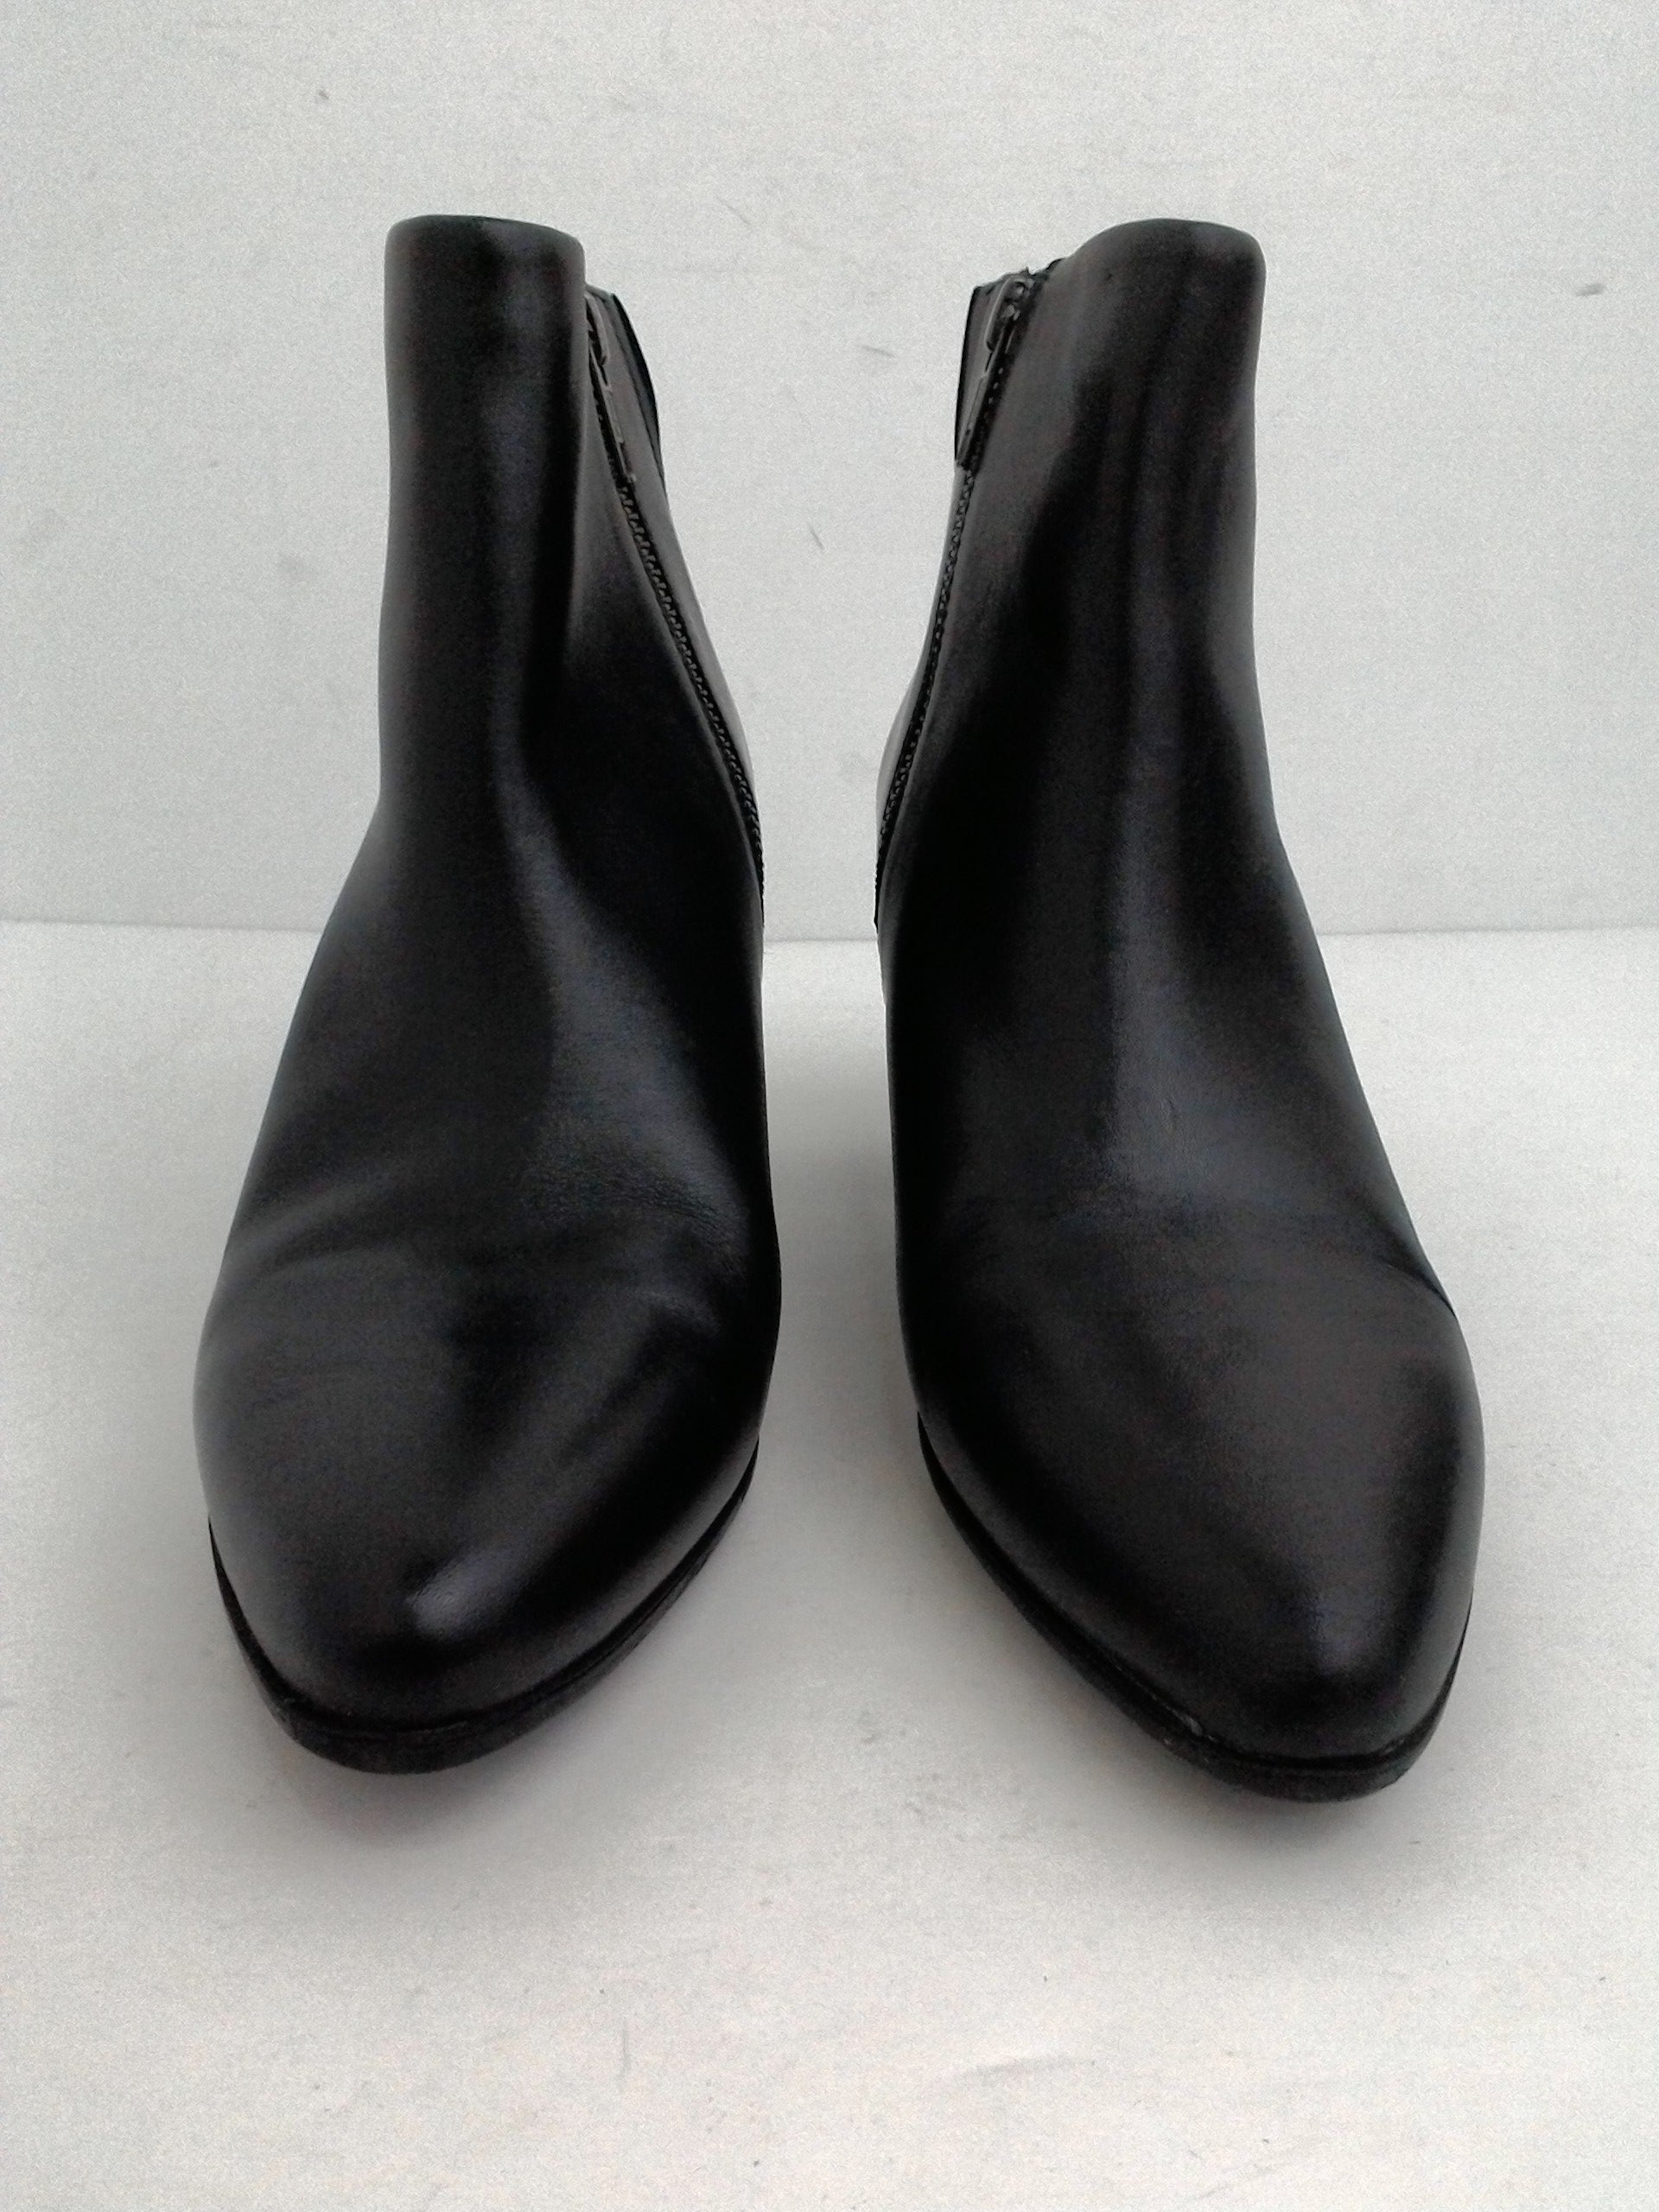 Rockport Women's Black Leather Booties Size 7.5 - Prime Shoes and More